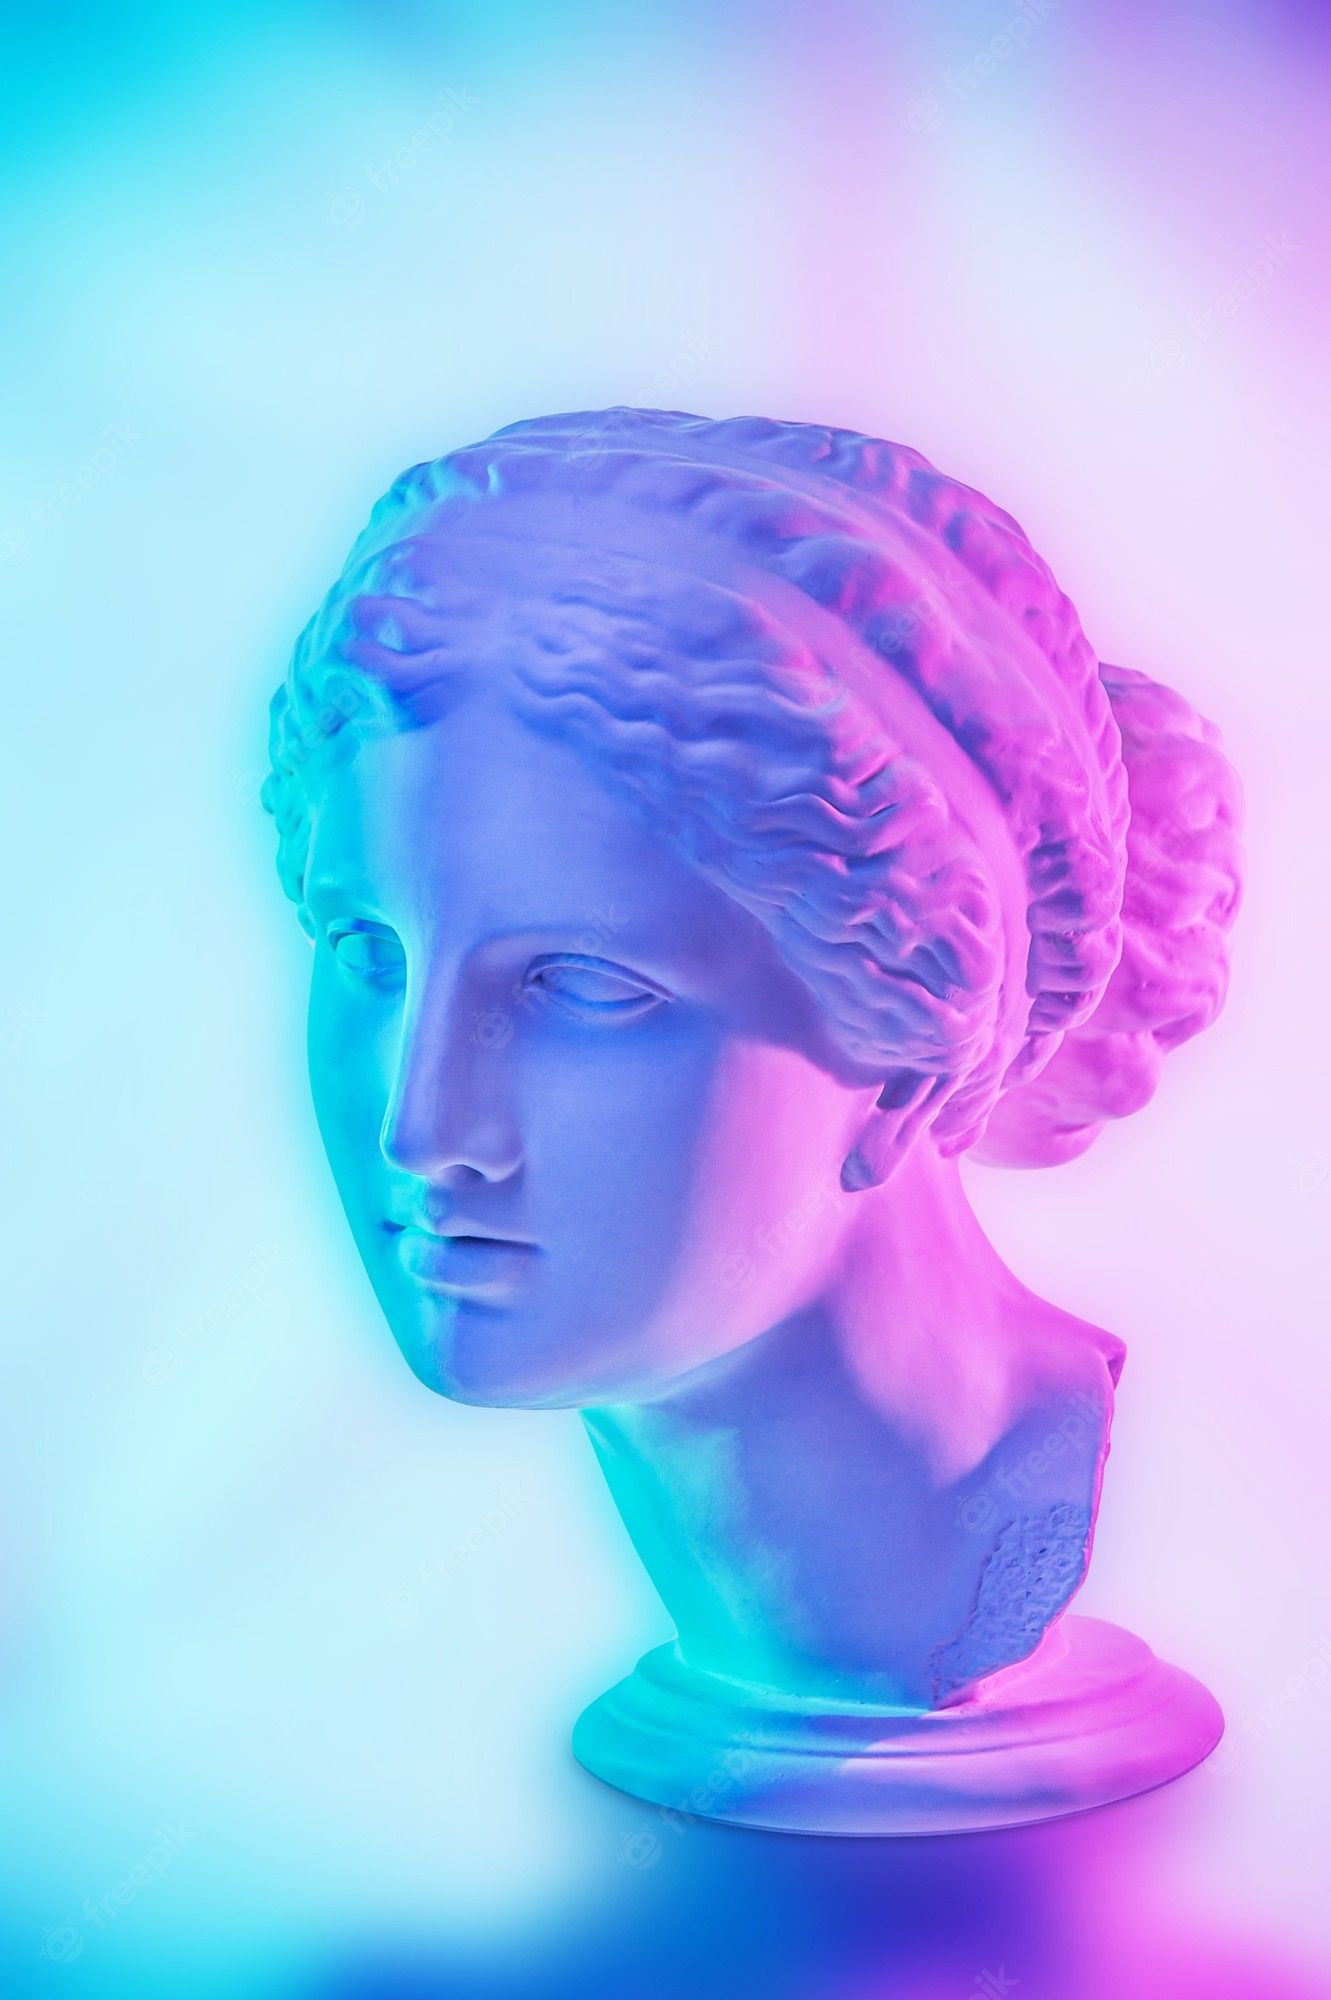 A sculpture of a woman's head in blue and purple light - Greek statue